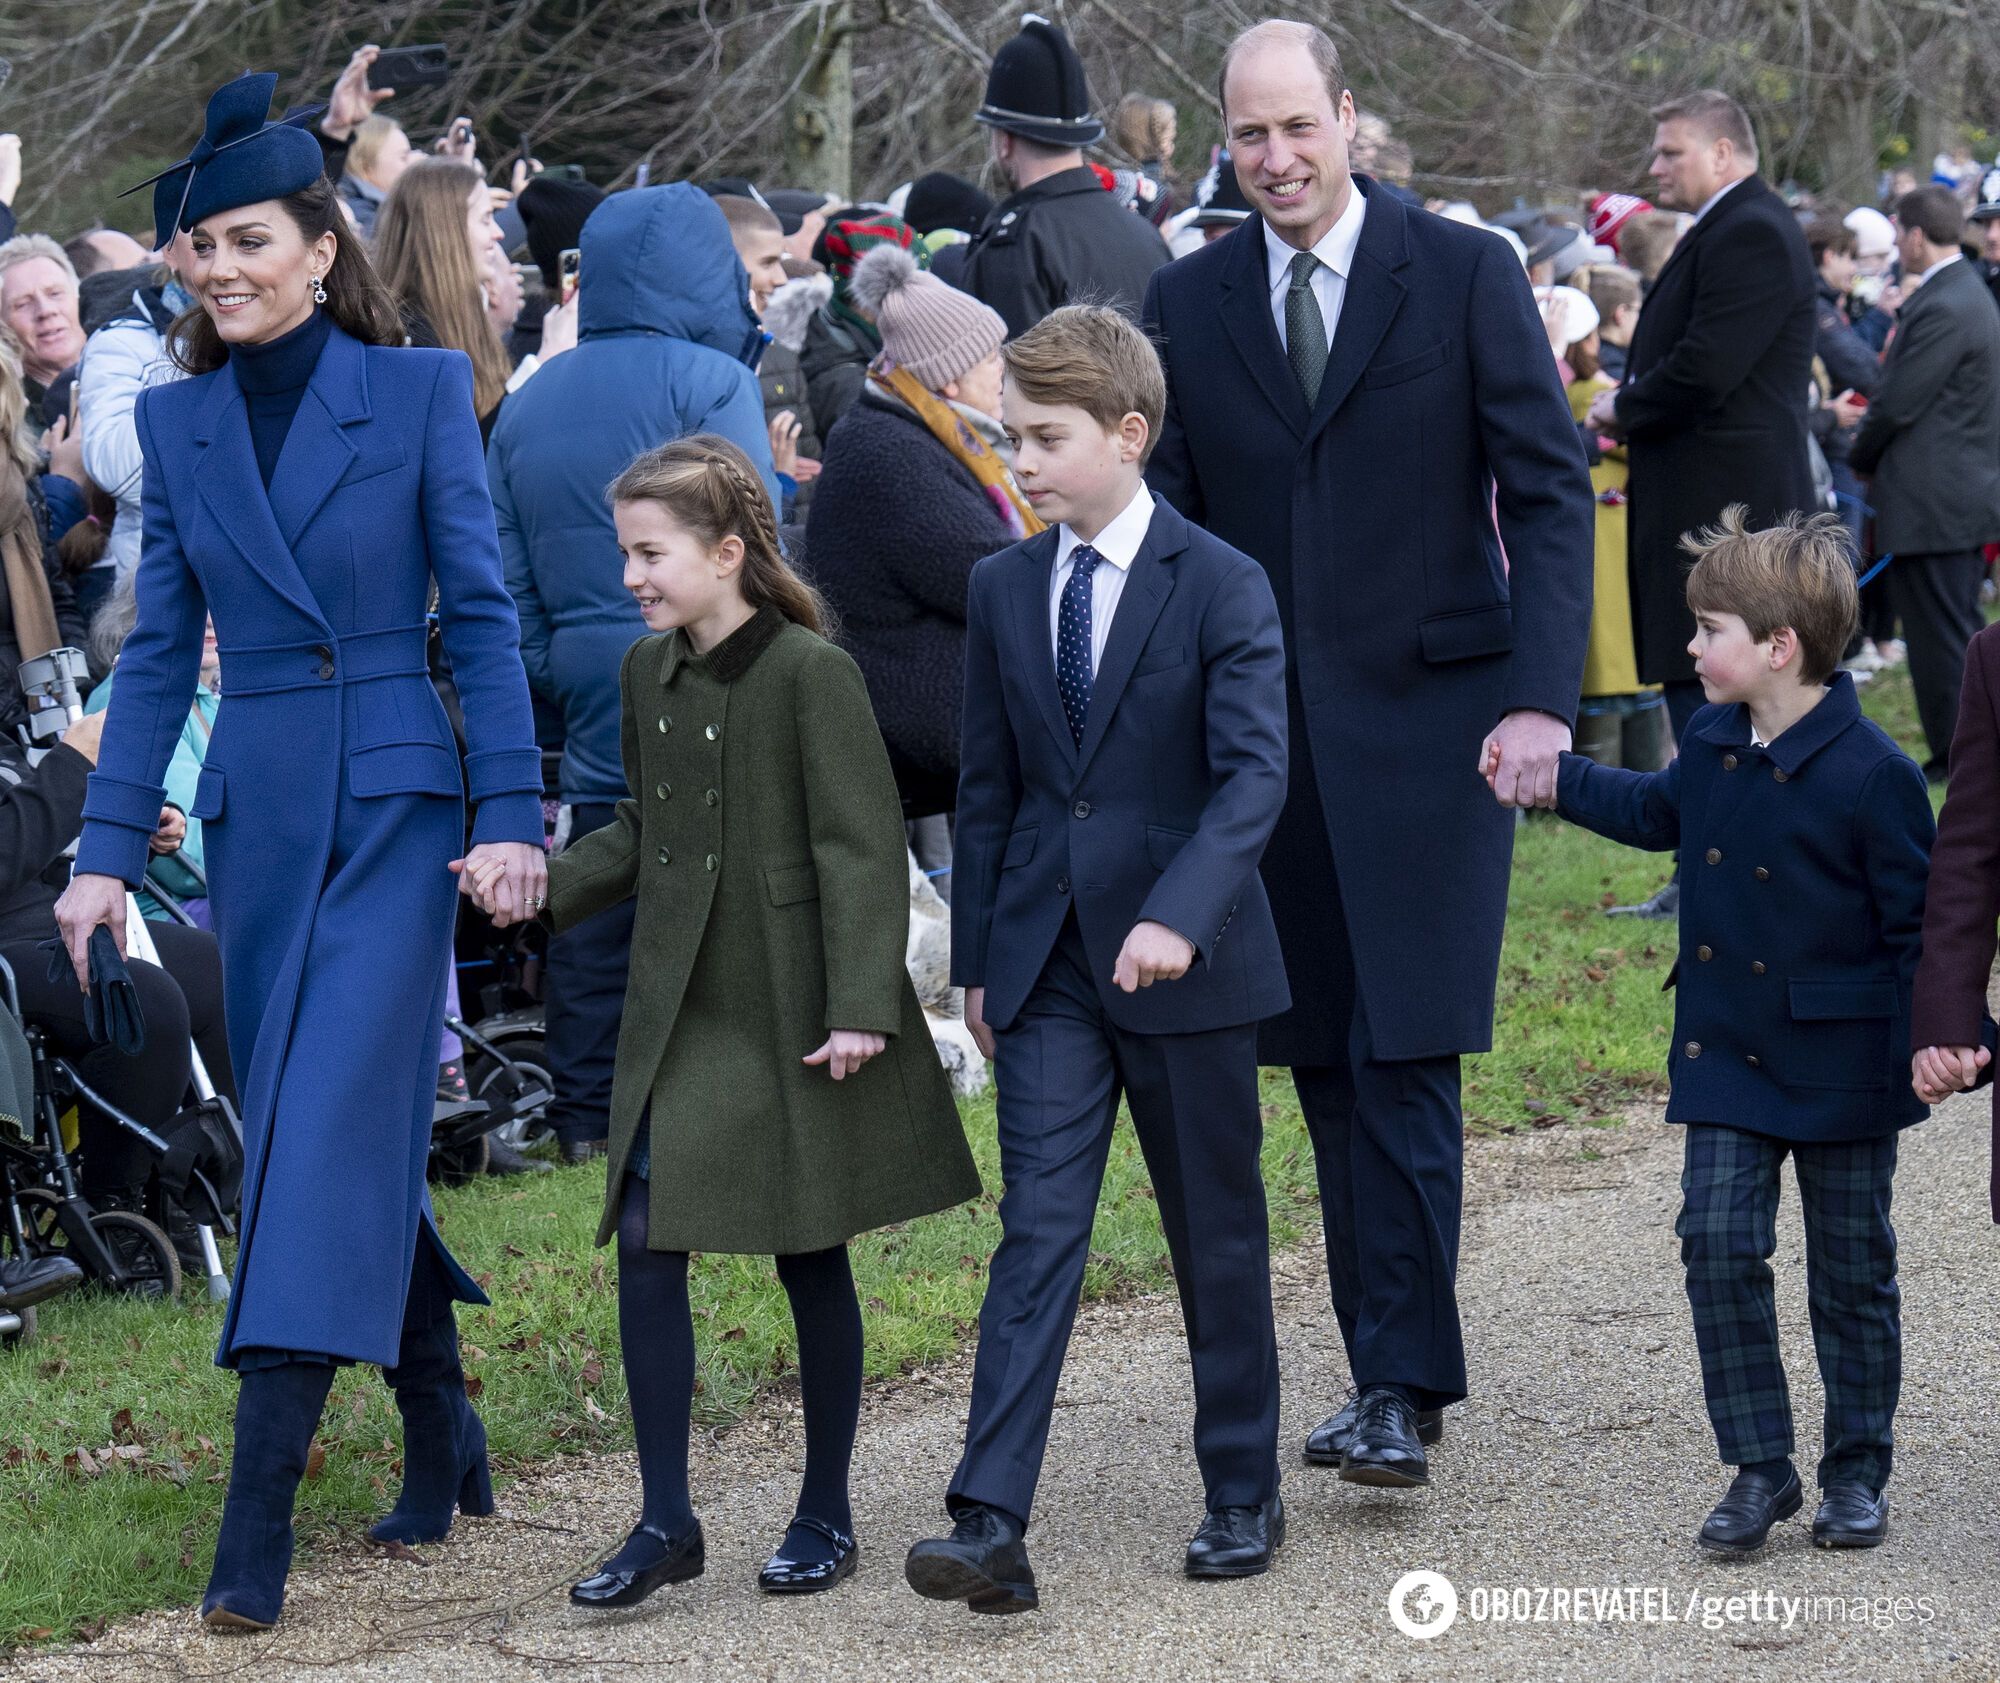 Prince William returned to royal duties for the first time after a pause and spoke about his father with cancer and his wife's surgery